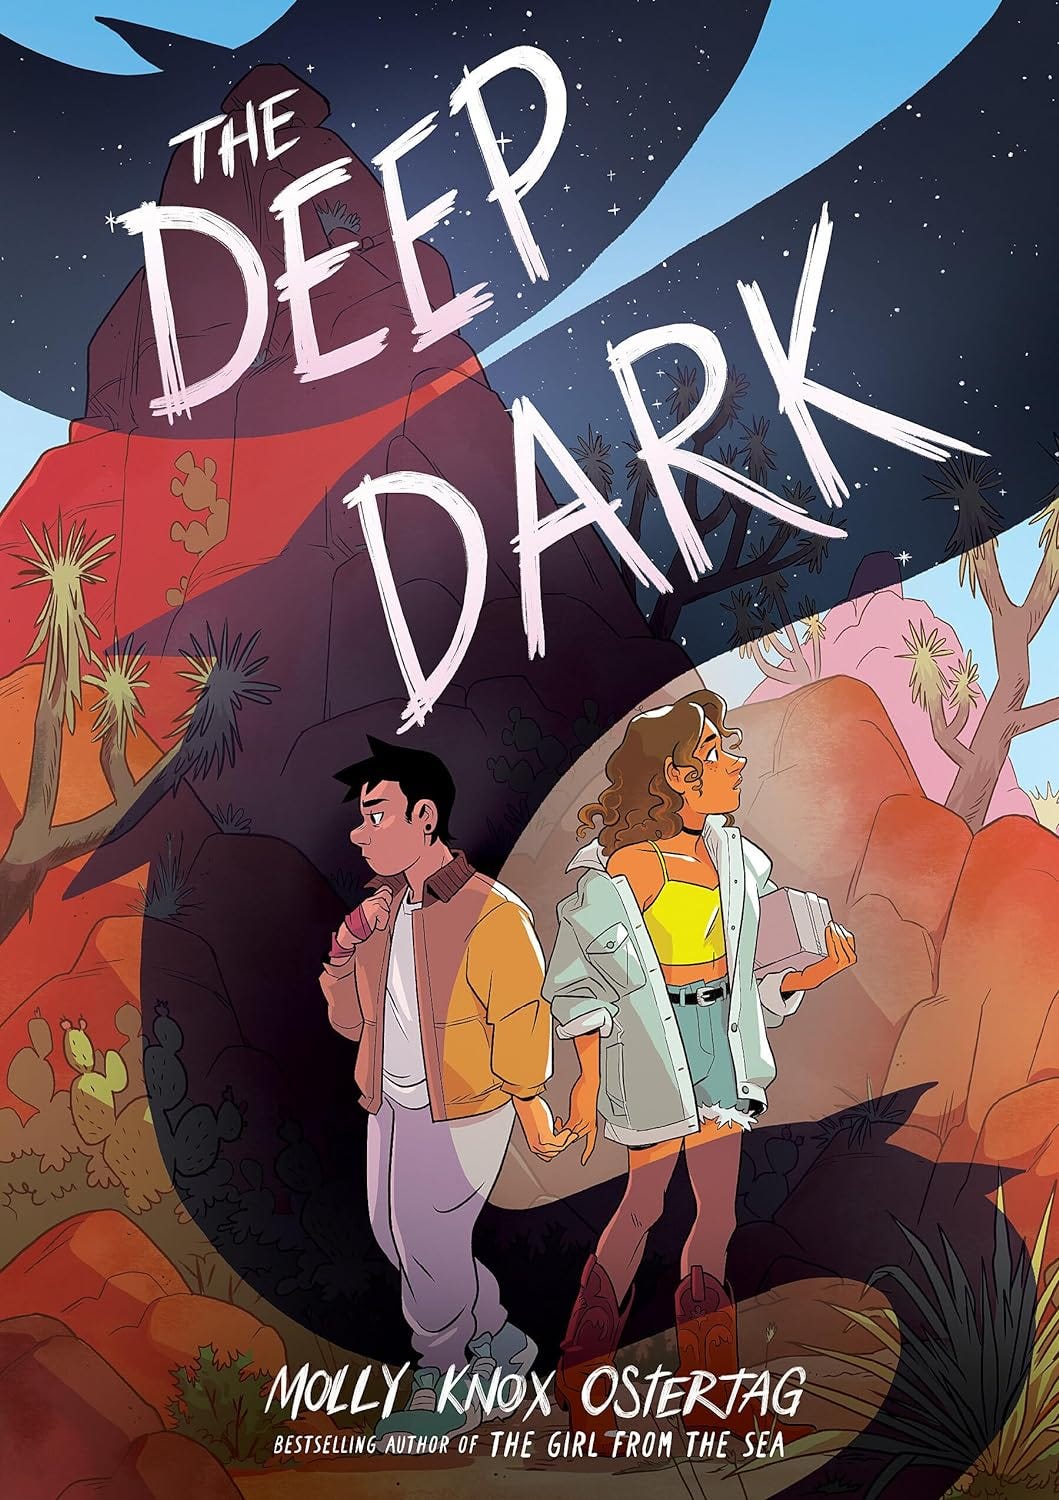 THE DEEP DARK cover! by Molly Knox Ostertag